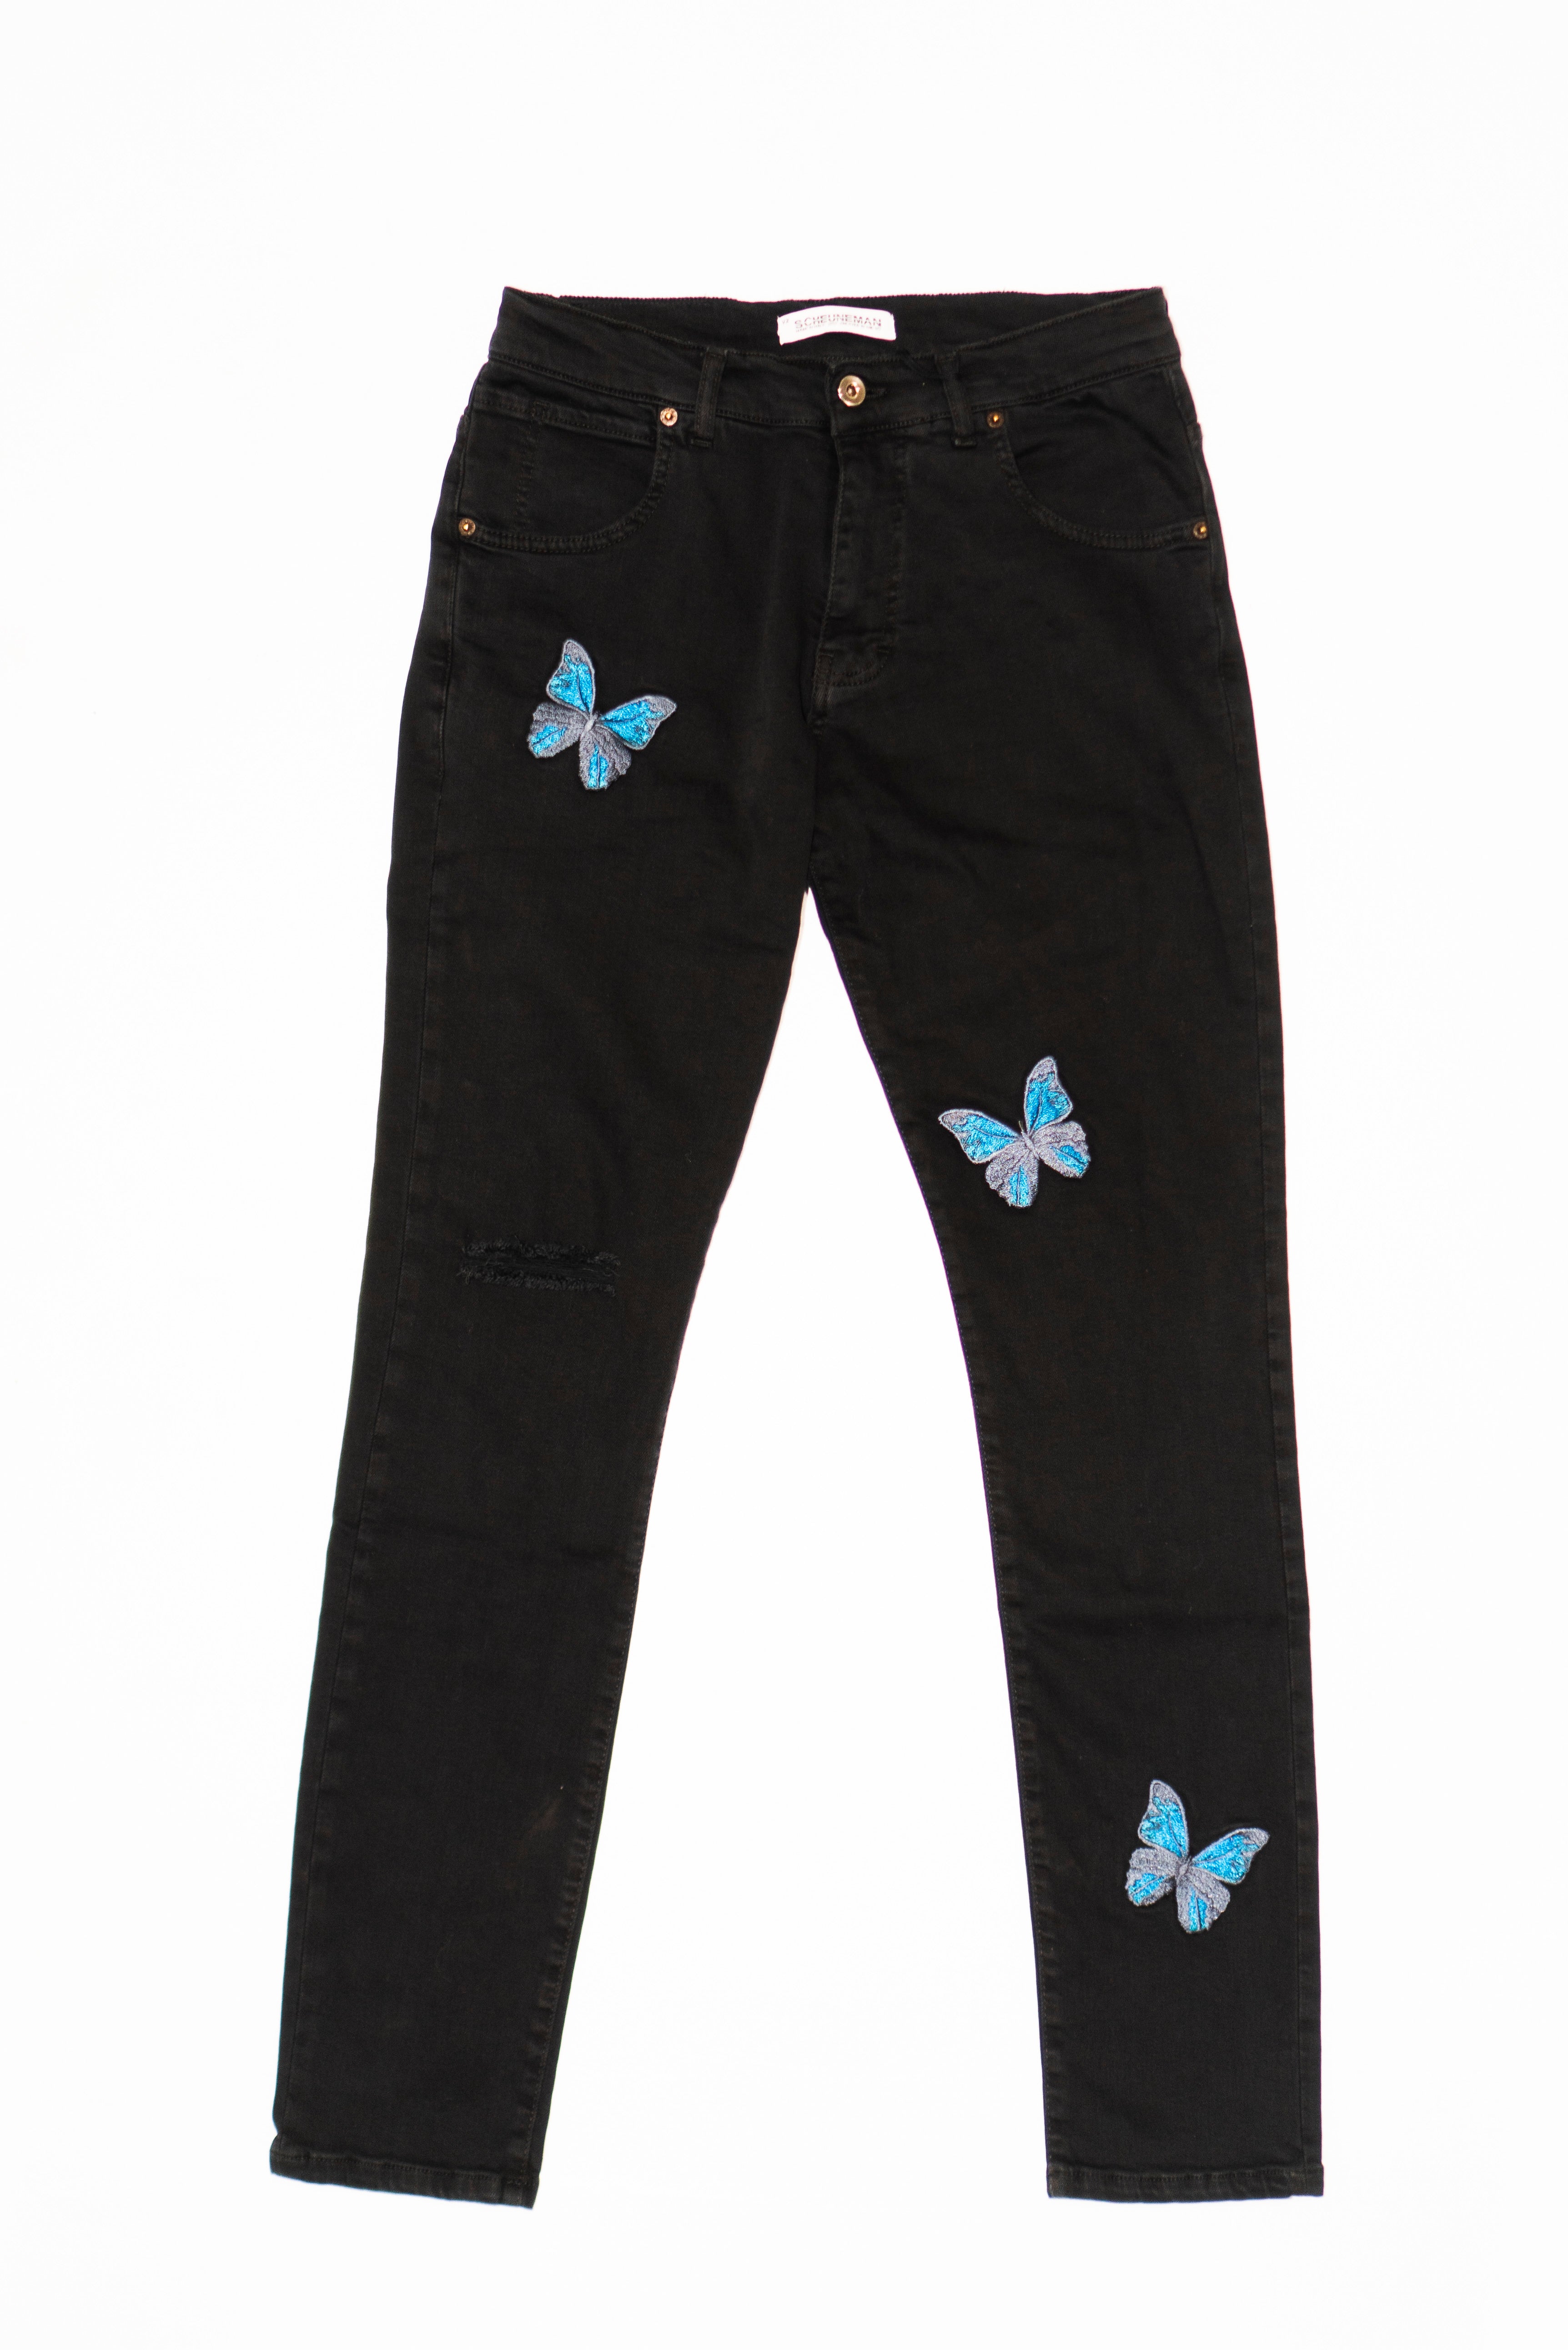 Embroidered Butterfly Jeans